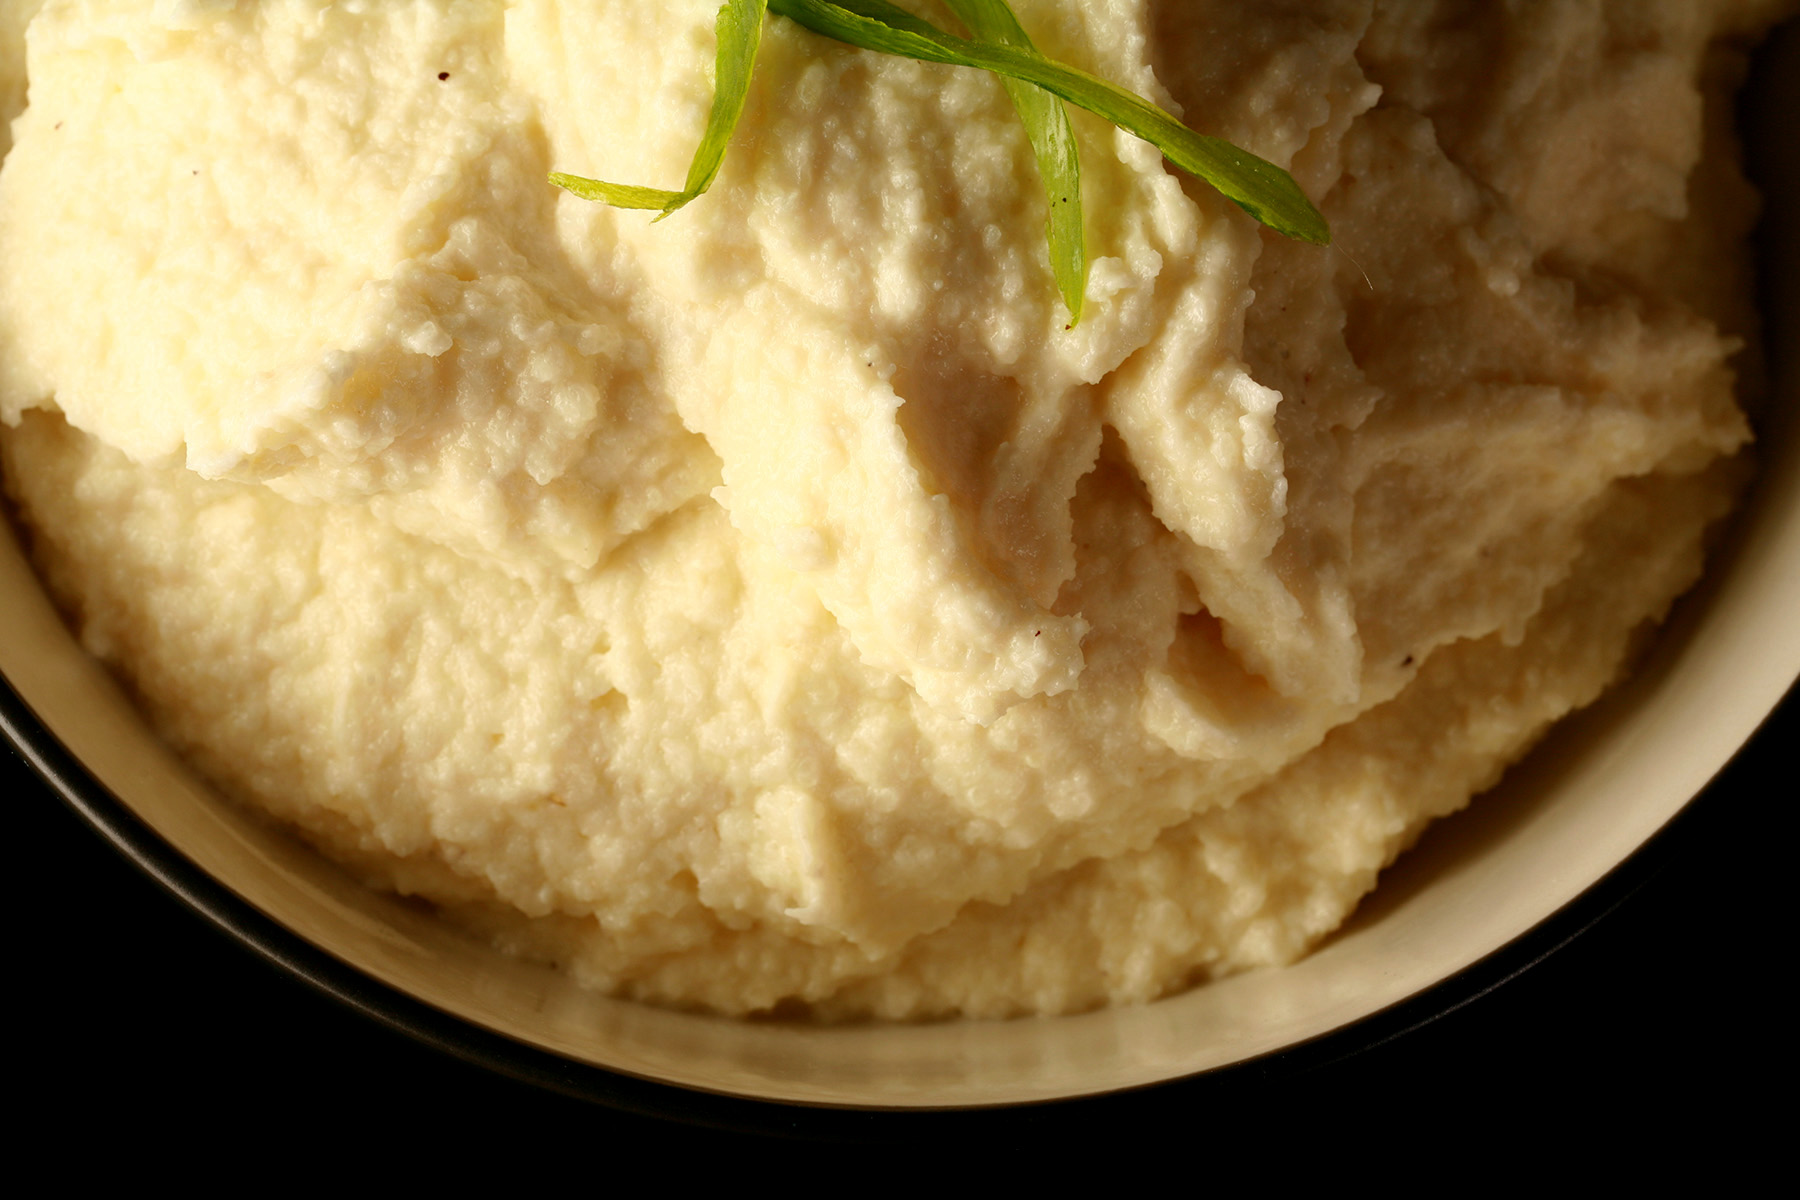 A close up view of a bowl of mashed cauliflower, with sliced green onions on top.